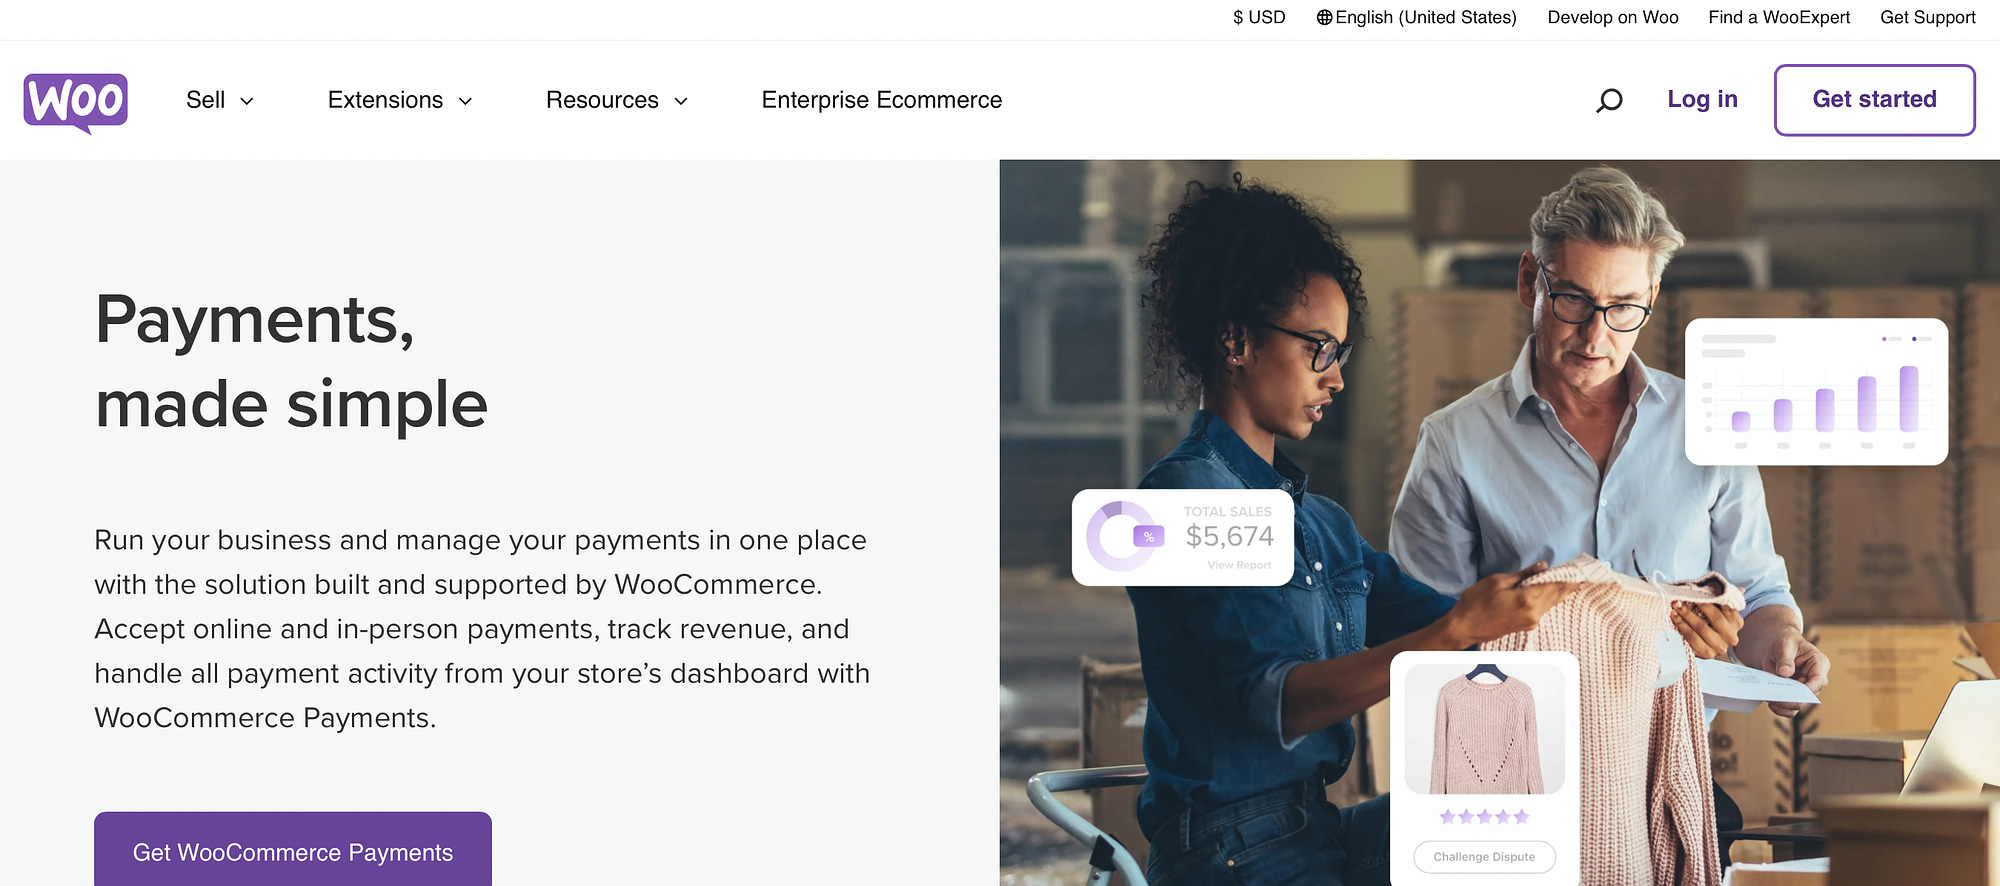 WooCommerce Payments page.